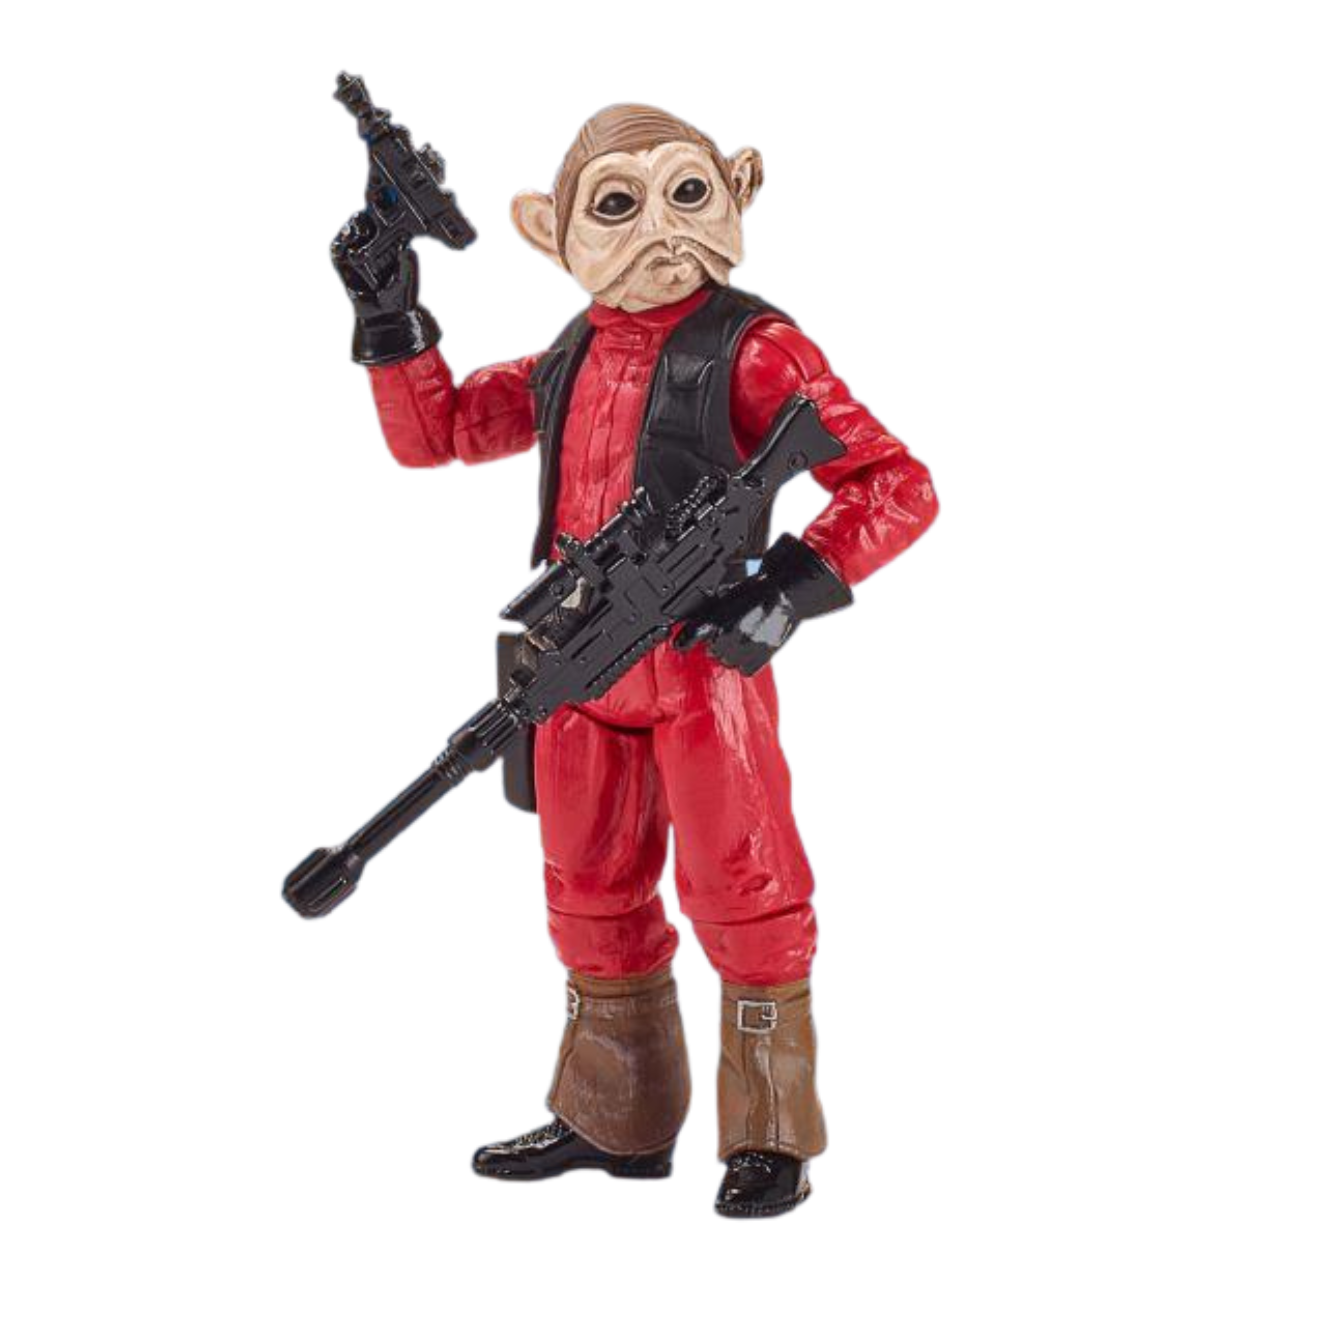 Star Wars 40th Anniversary The Vintage Collection Nien Nunb (Return of the Jedi)